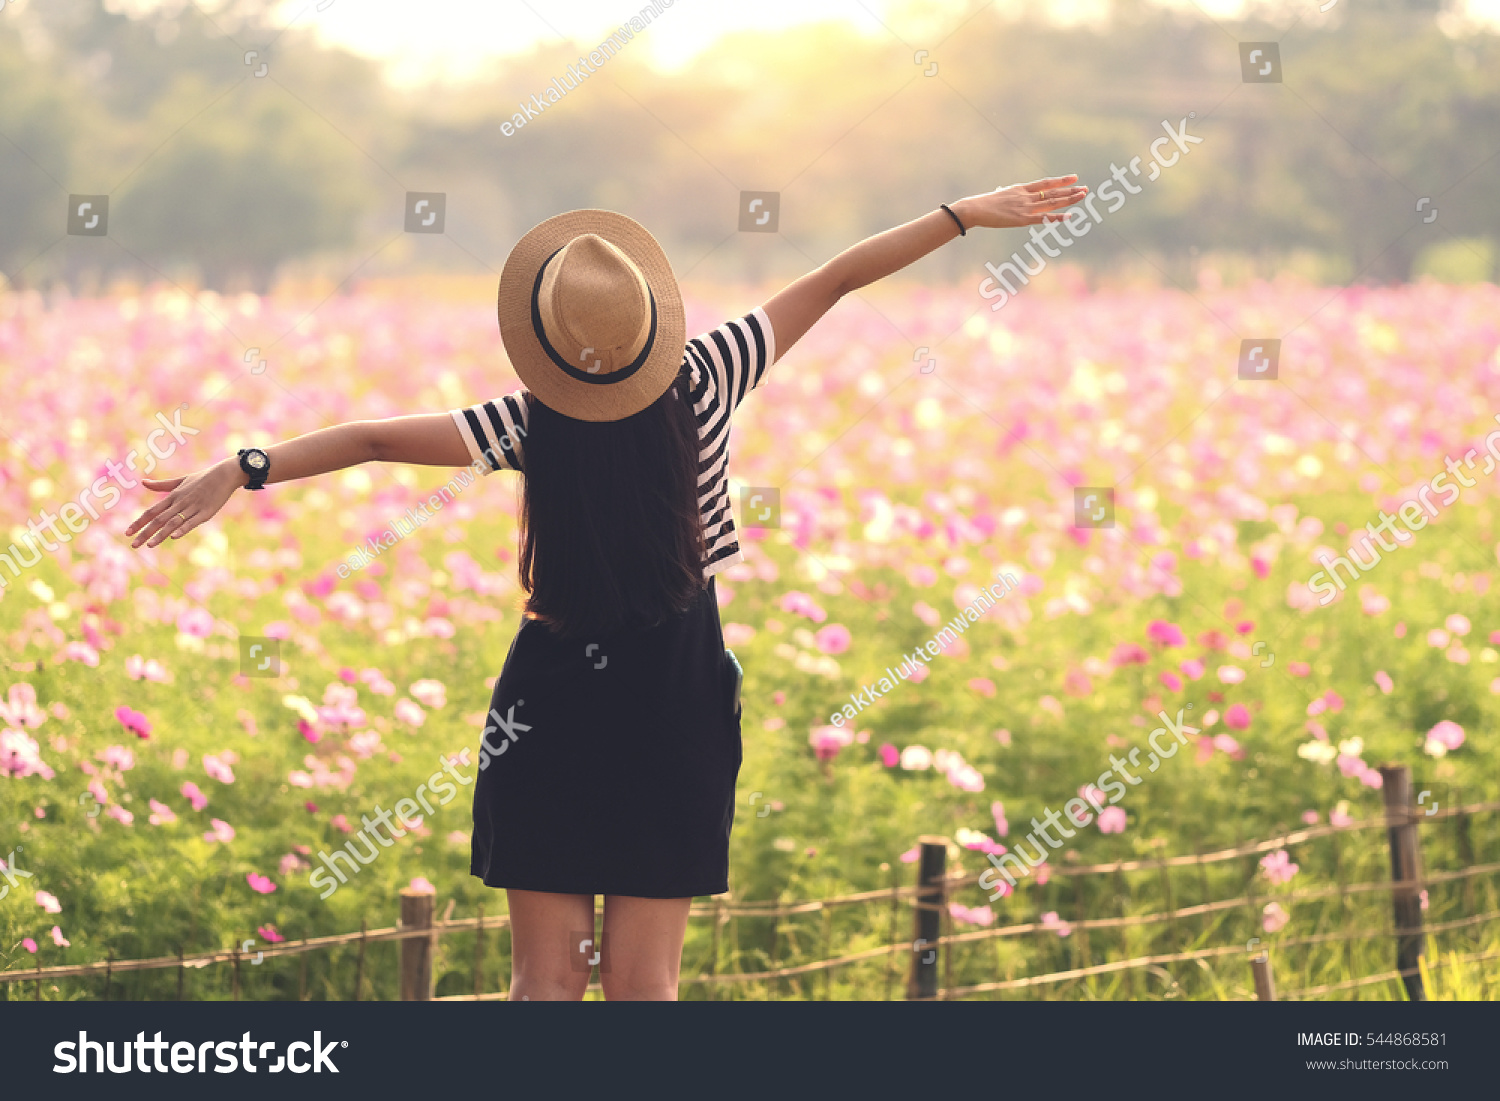 Beauty Girl Outdoors enjoying nature. Beautiful Teenage Model girl in black dress standing  on the Spring Field, Sun Light. freedom concept #544868581